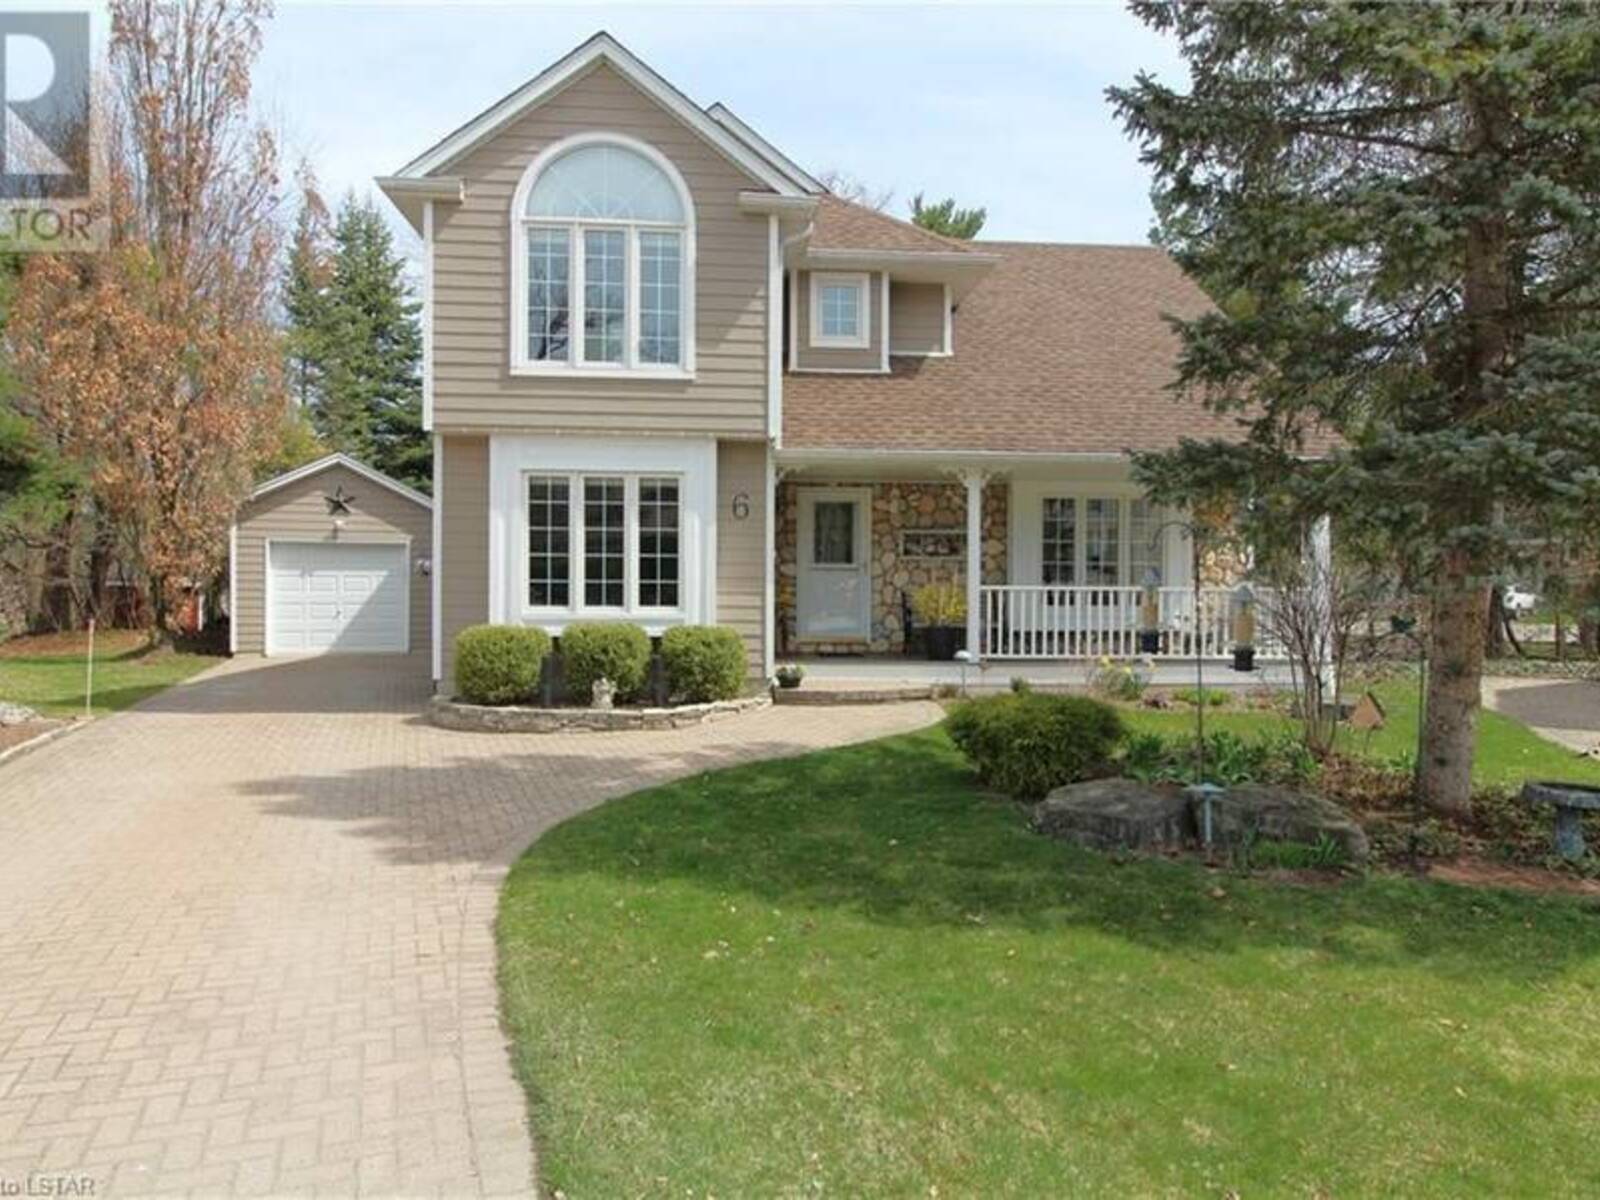 6 HARBOUR PARK Court, Grand Bend, Ontario N0M 1T0